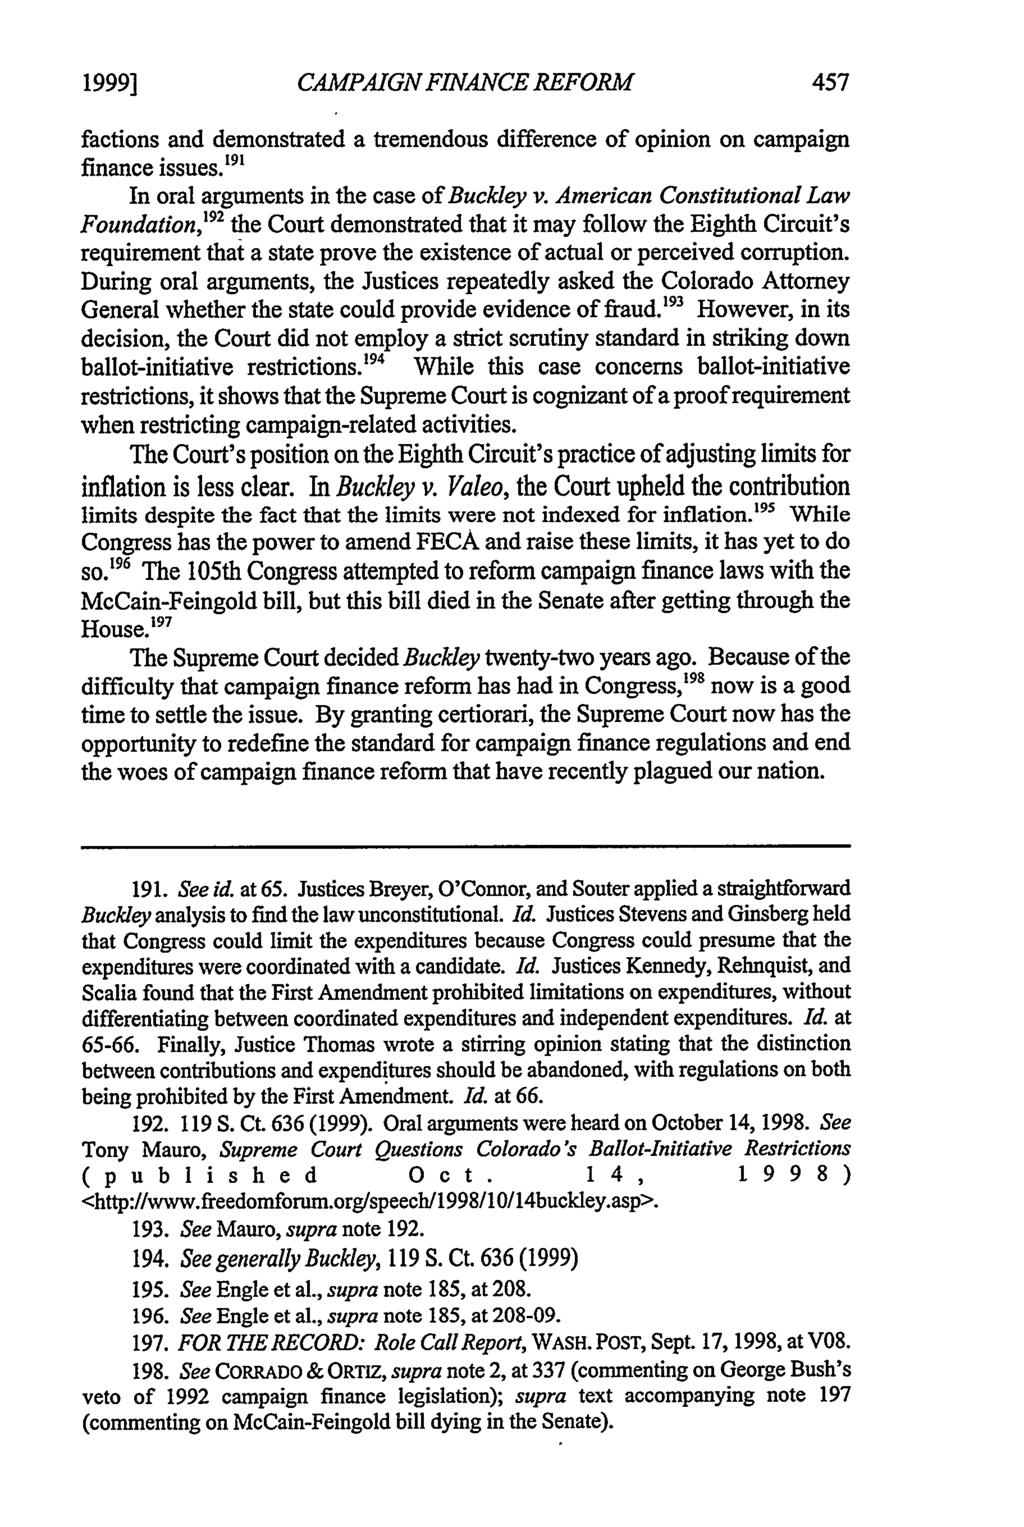 1999] Criscimagna: Criscimagna: Narrow Application of Buckley v. Valeo: CAMPAIGN FINANCE REFORM factions and demonstrated a tremendous difference of opinion on campaign finance issues.